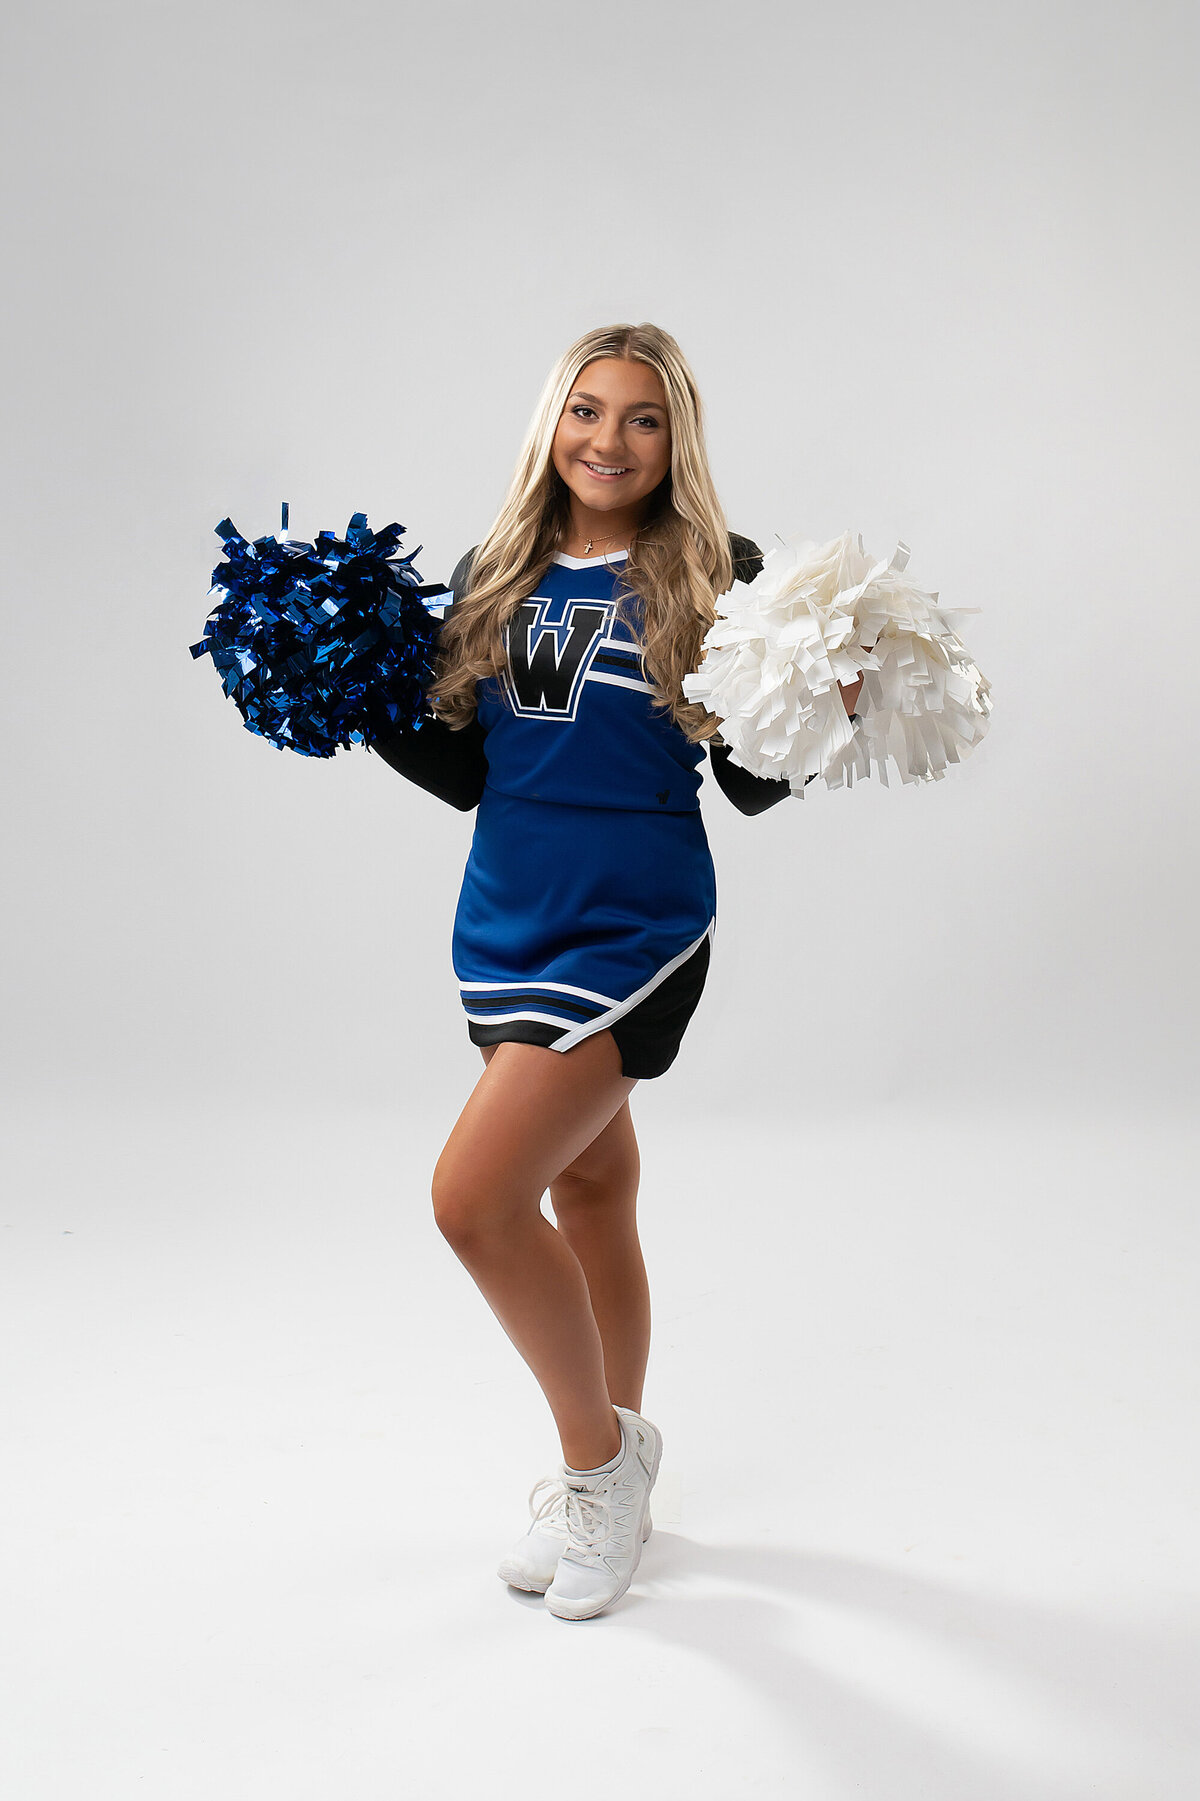 A senior student from Waukesha West High School stands in our photo studio wearing her cheerleading uniform and holding poms.